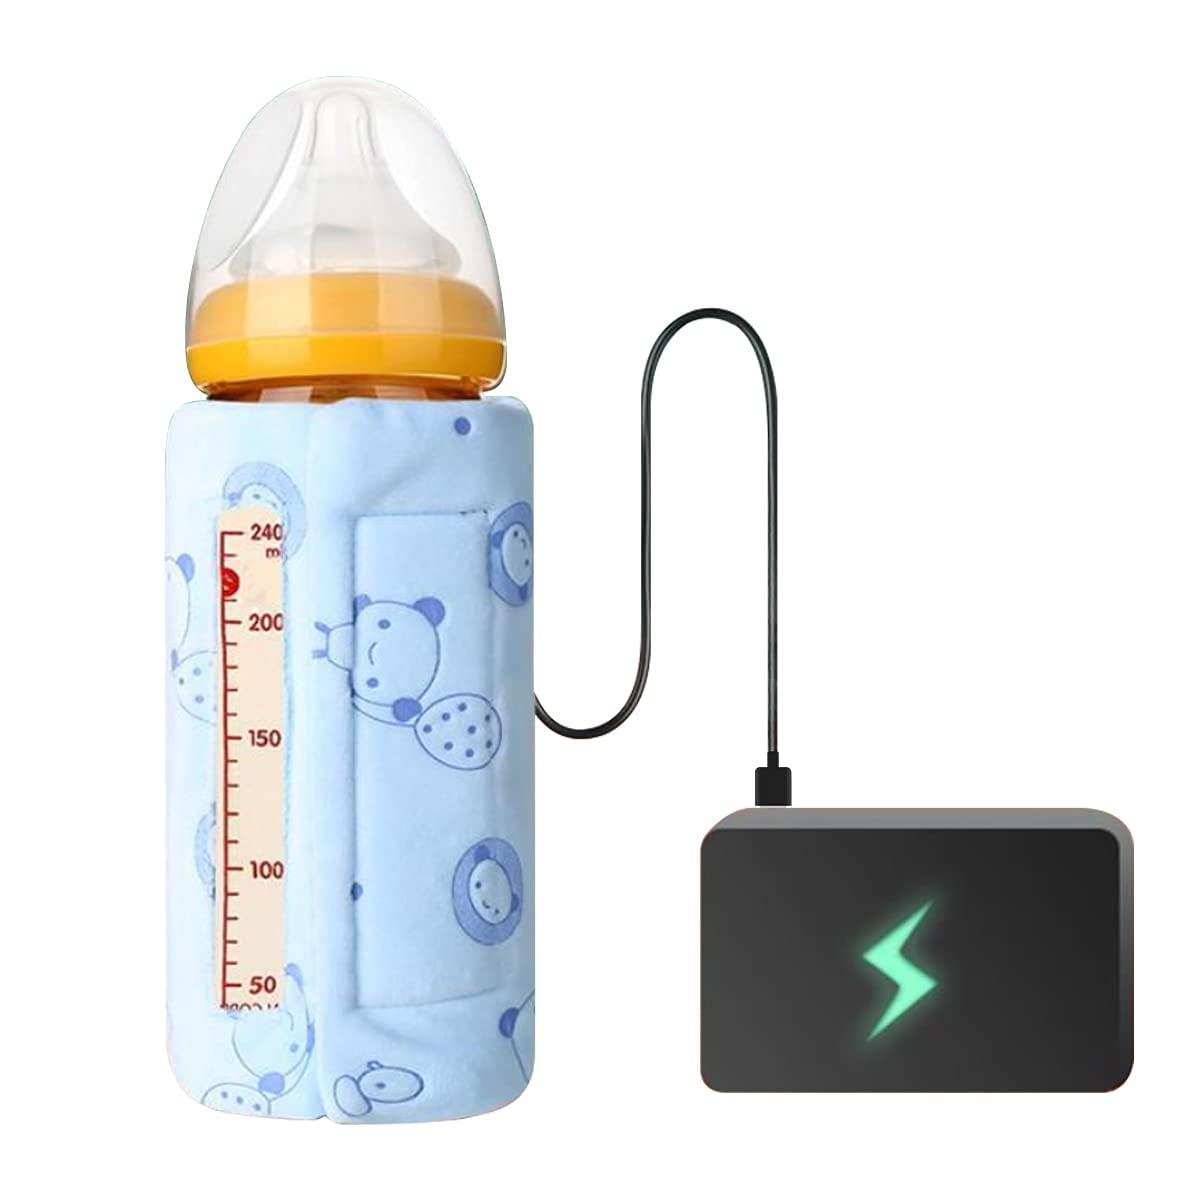 Blue USA Fashions Newborn USB Charging Milk Bottle Cosy Warmer Zipper Bag Outdoor Home Gift for New Mother 